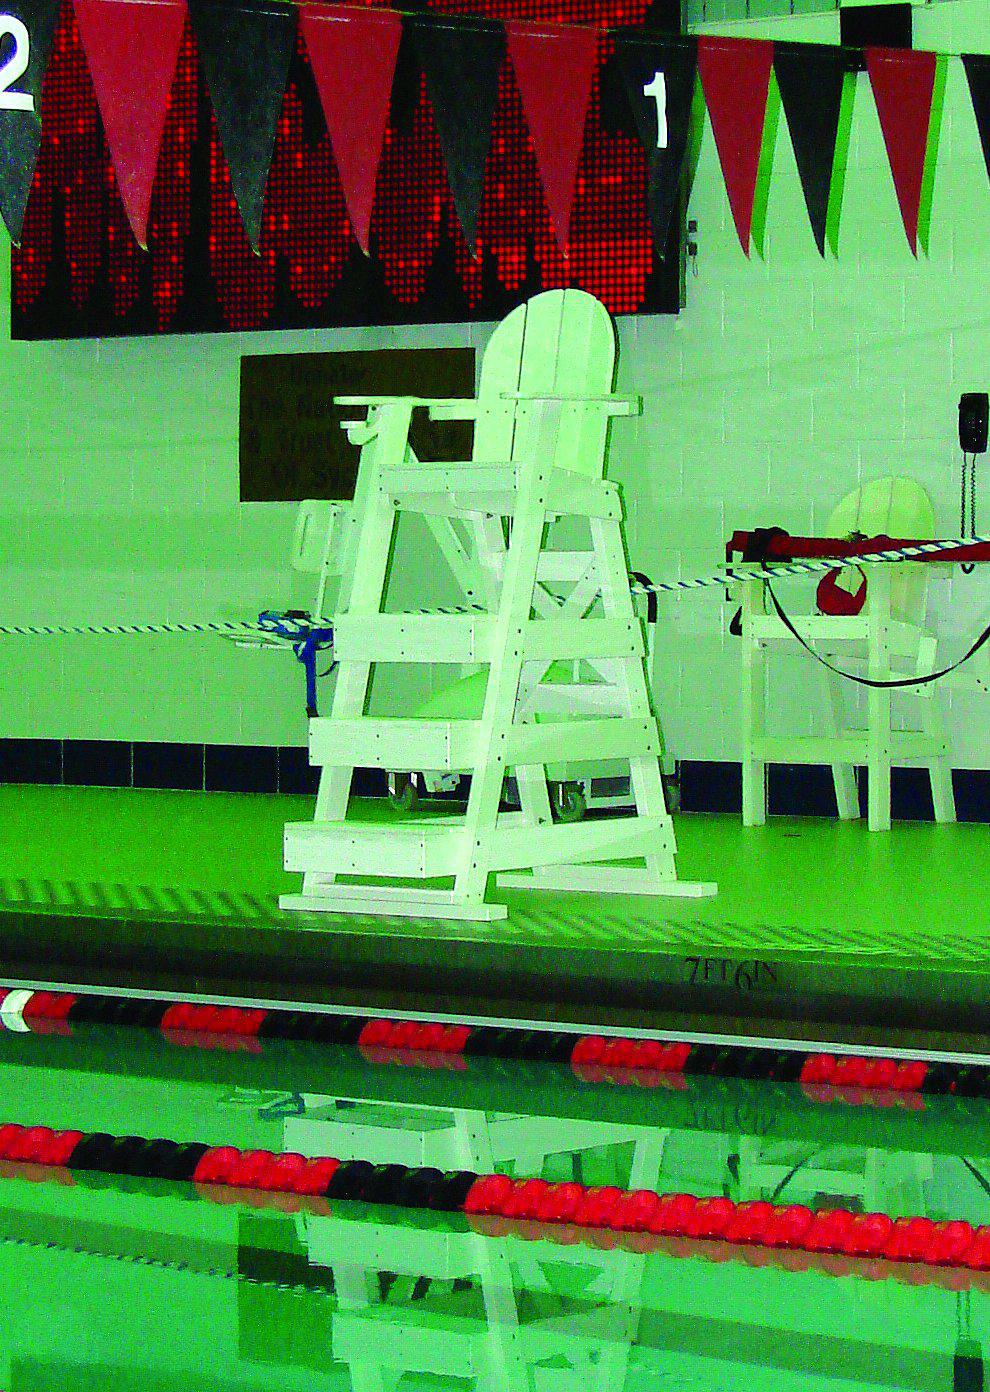 Tailwind Furniture Recycled Plastic Lifeguard Chair - LG-515 - Seat Height 50" - LEAD TIME TO SHIP 10 TO 12 BUSINESS DAYS